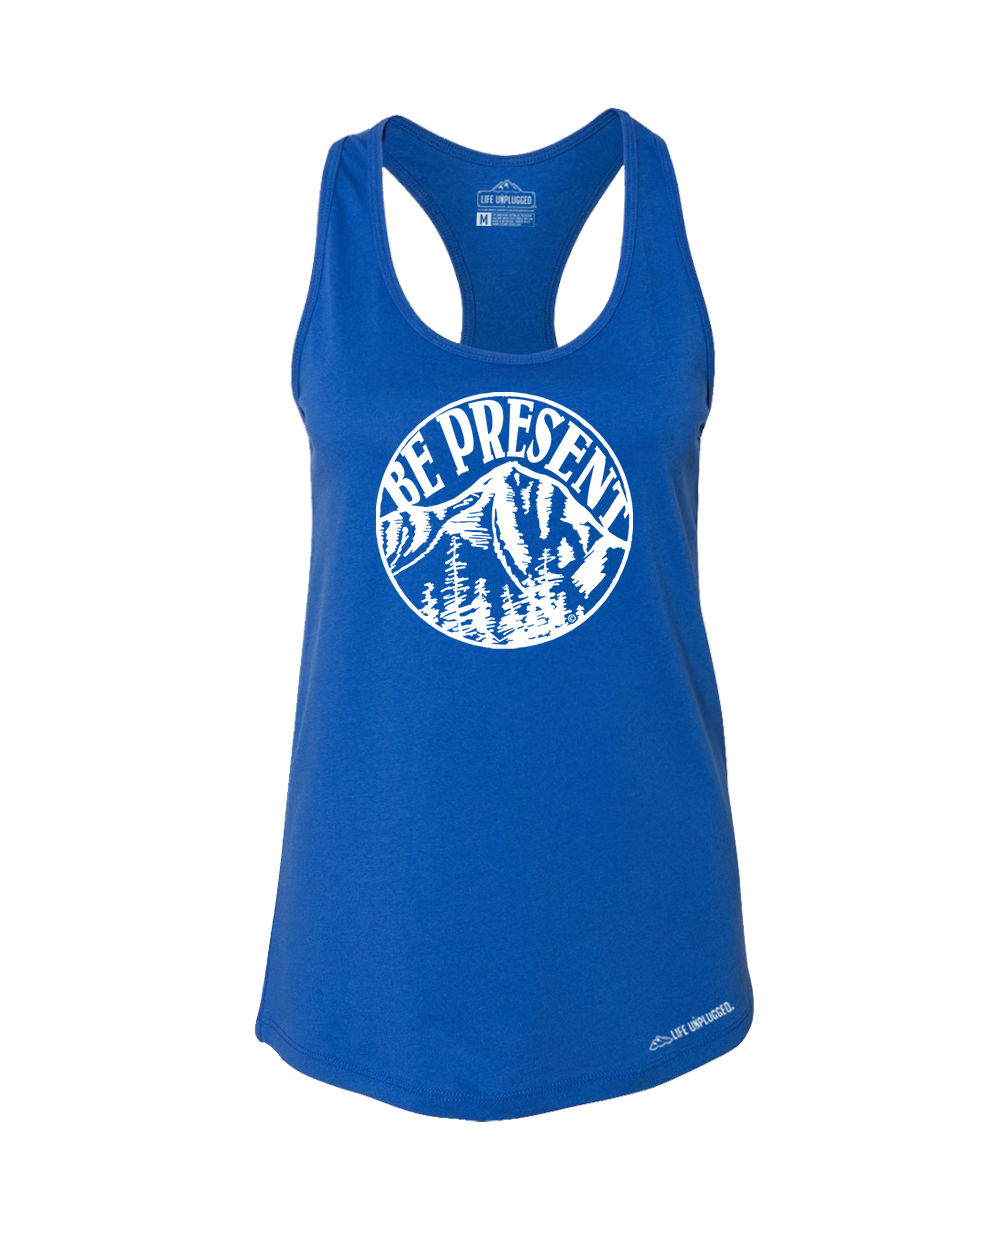 Be Present Mountain Premium Women's Relaxed Fit Racerback Tank Top - Life Unplugged